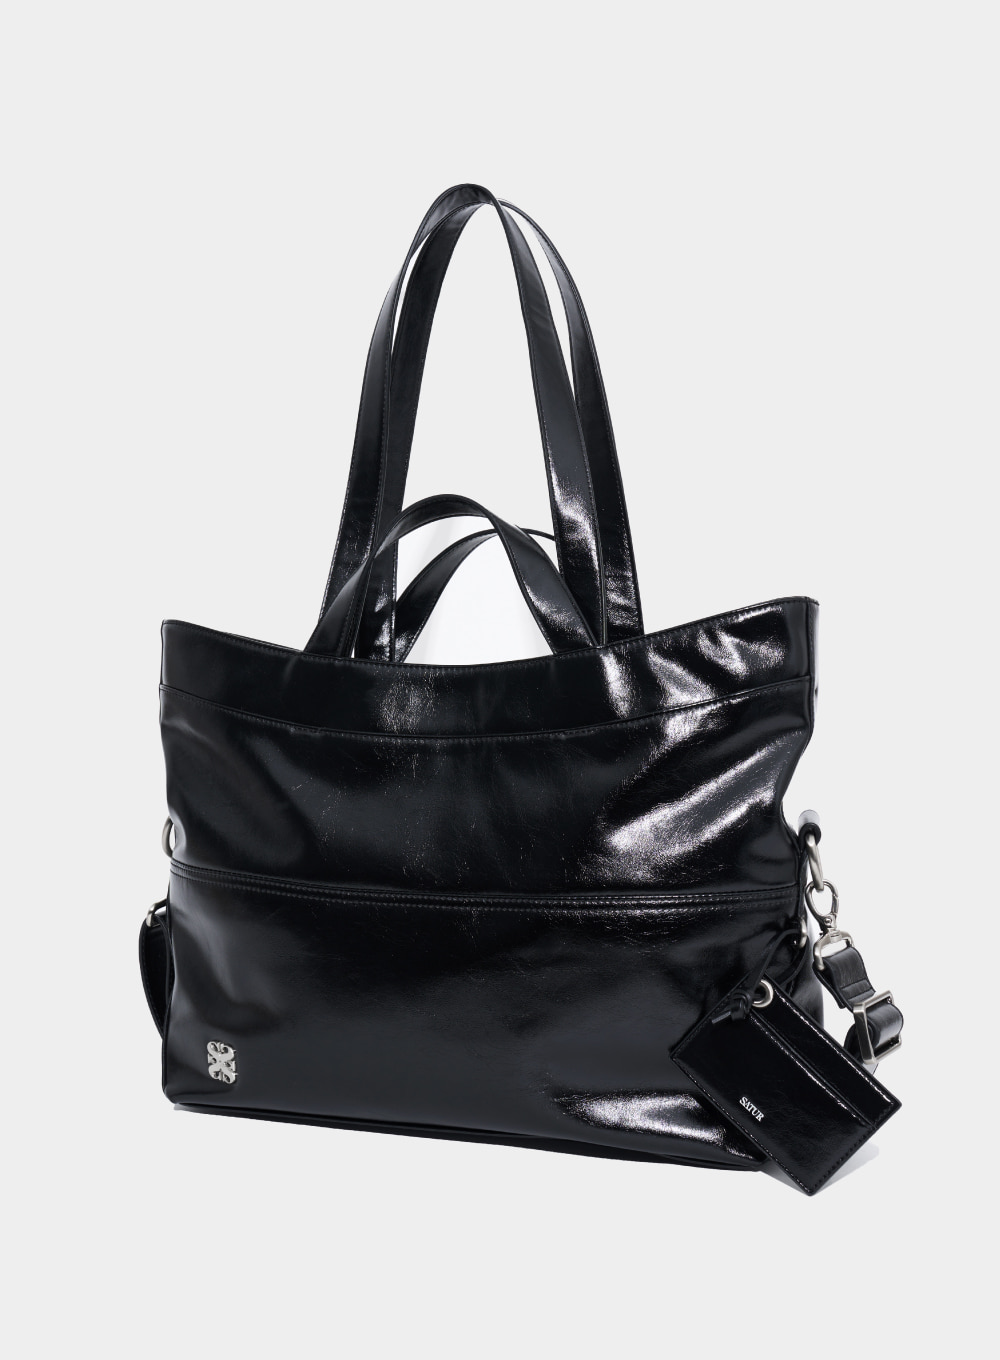 Nuoro 3-Way Middle Bag - Glossy Black